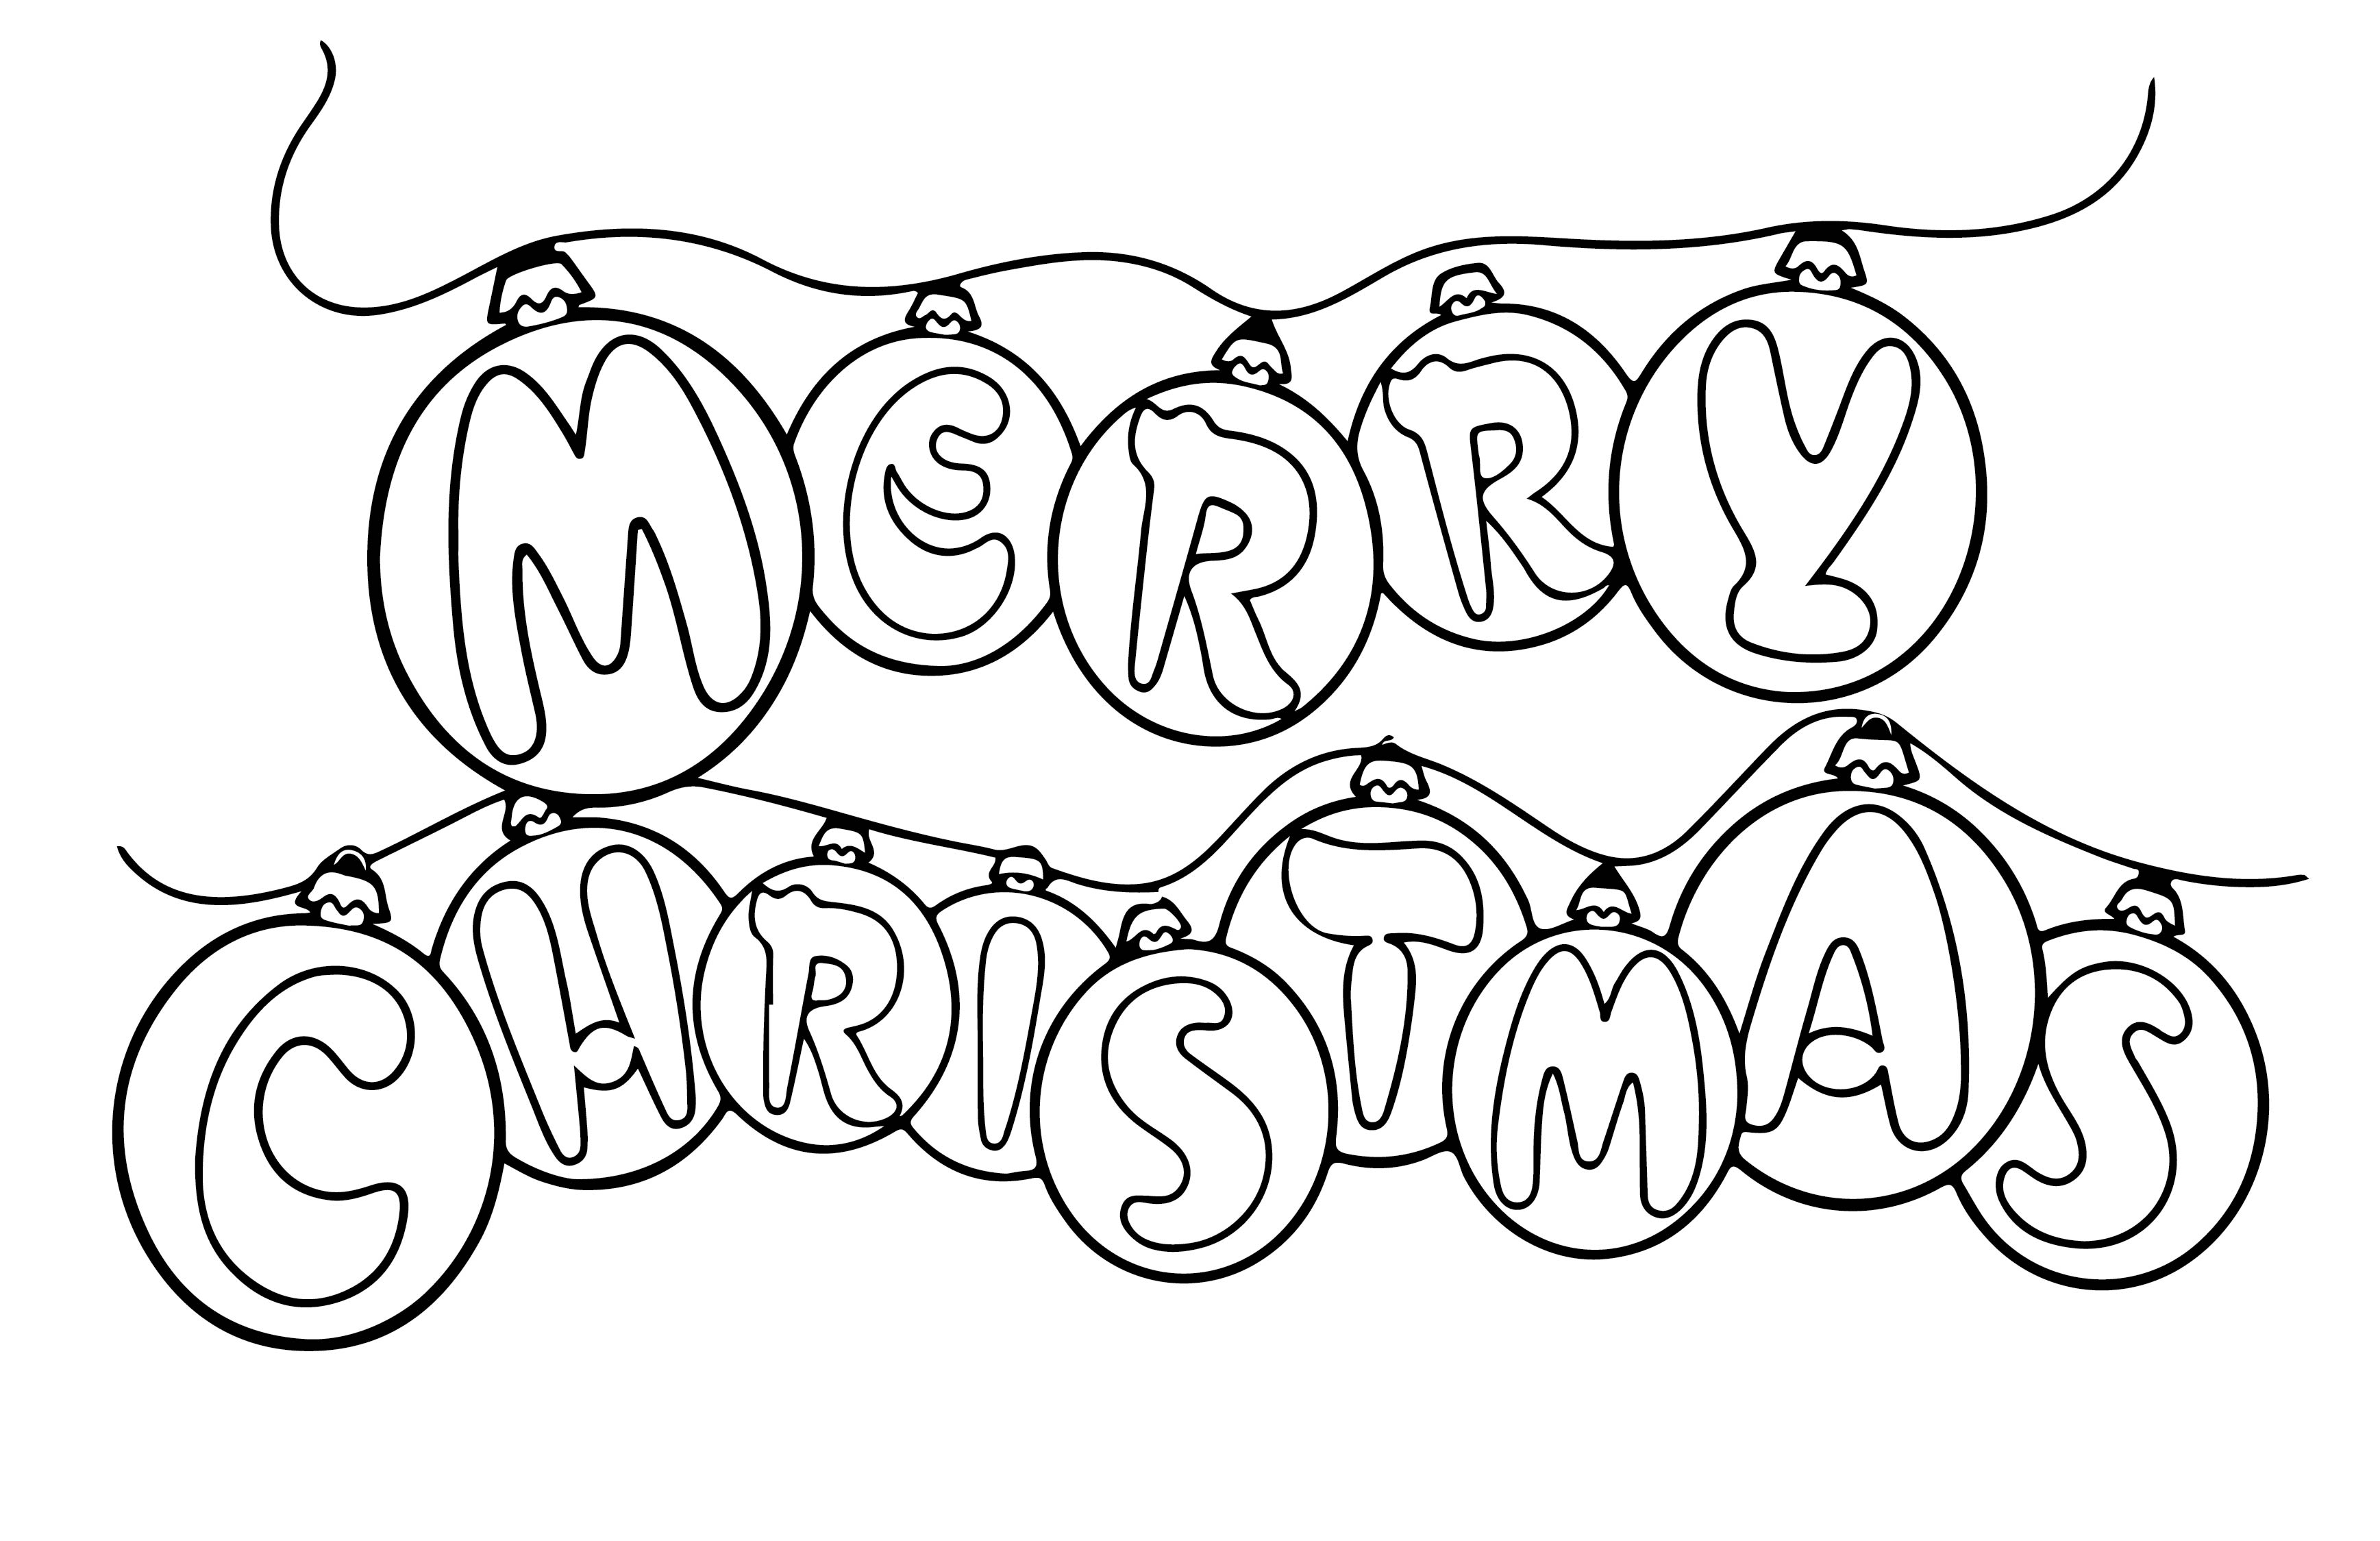 Christmas Printable Images Gallery Category Page 6 Printablee